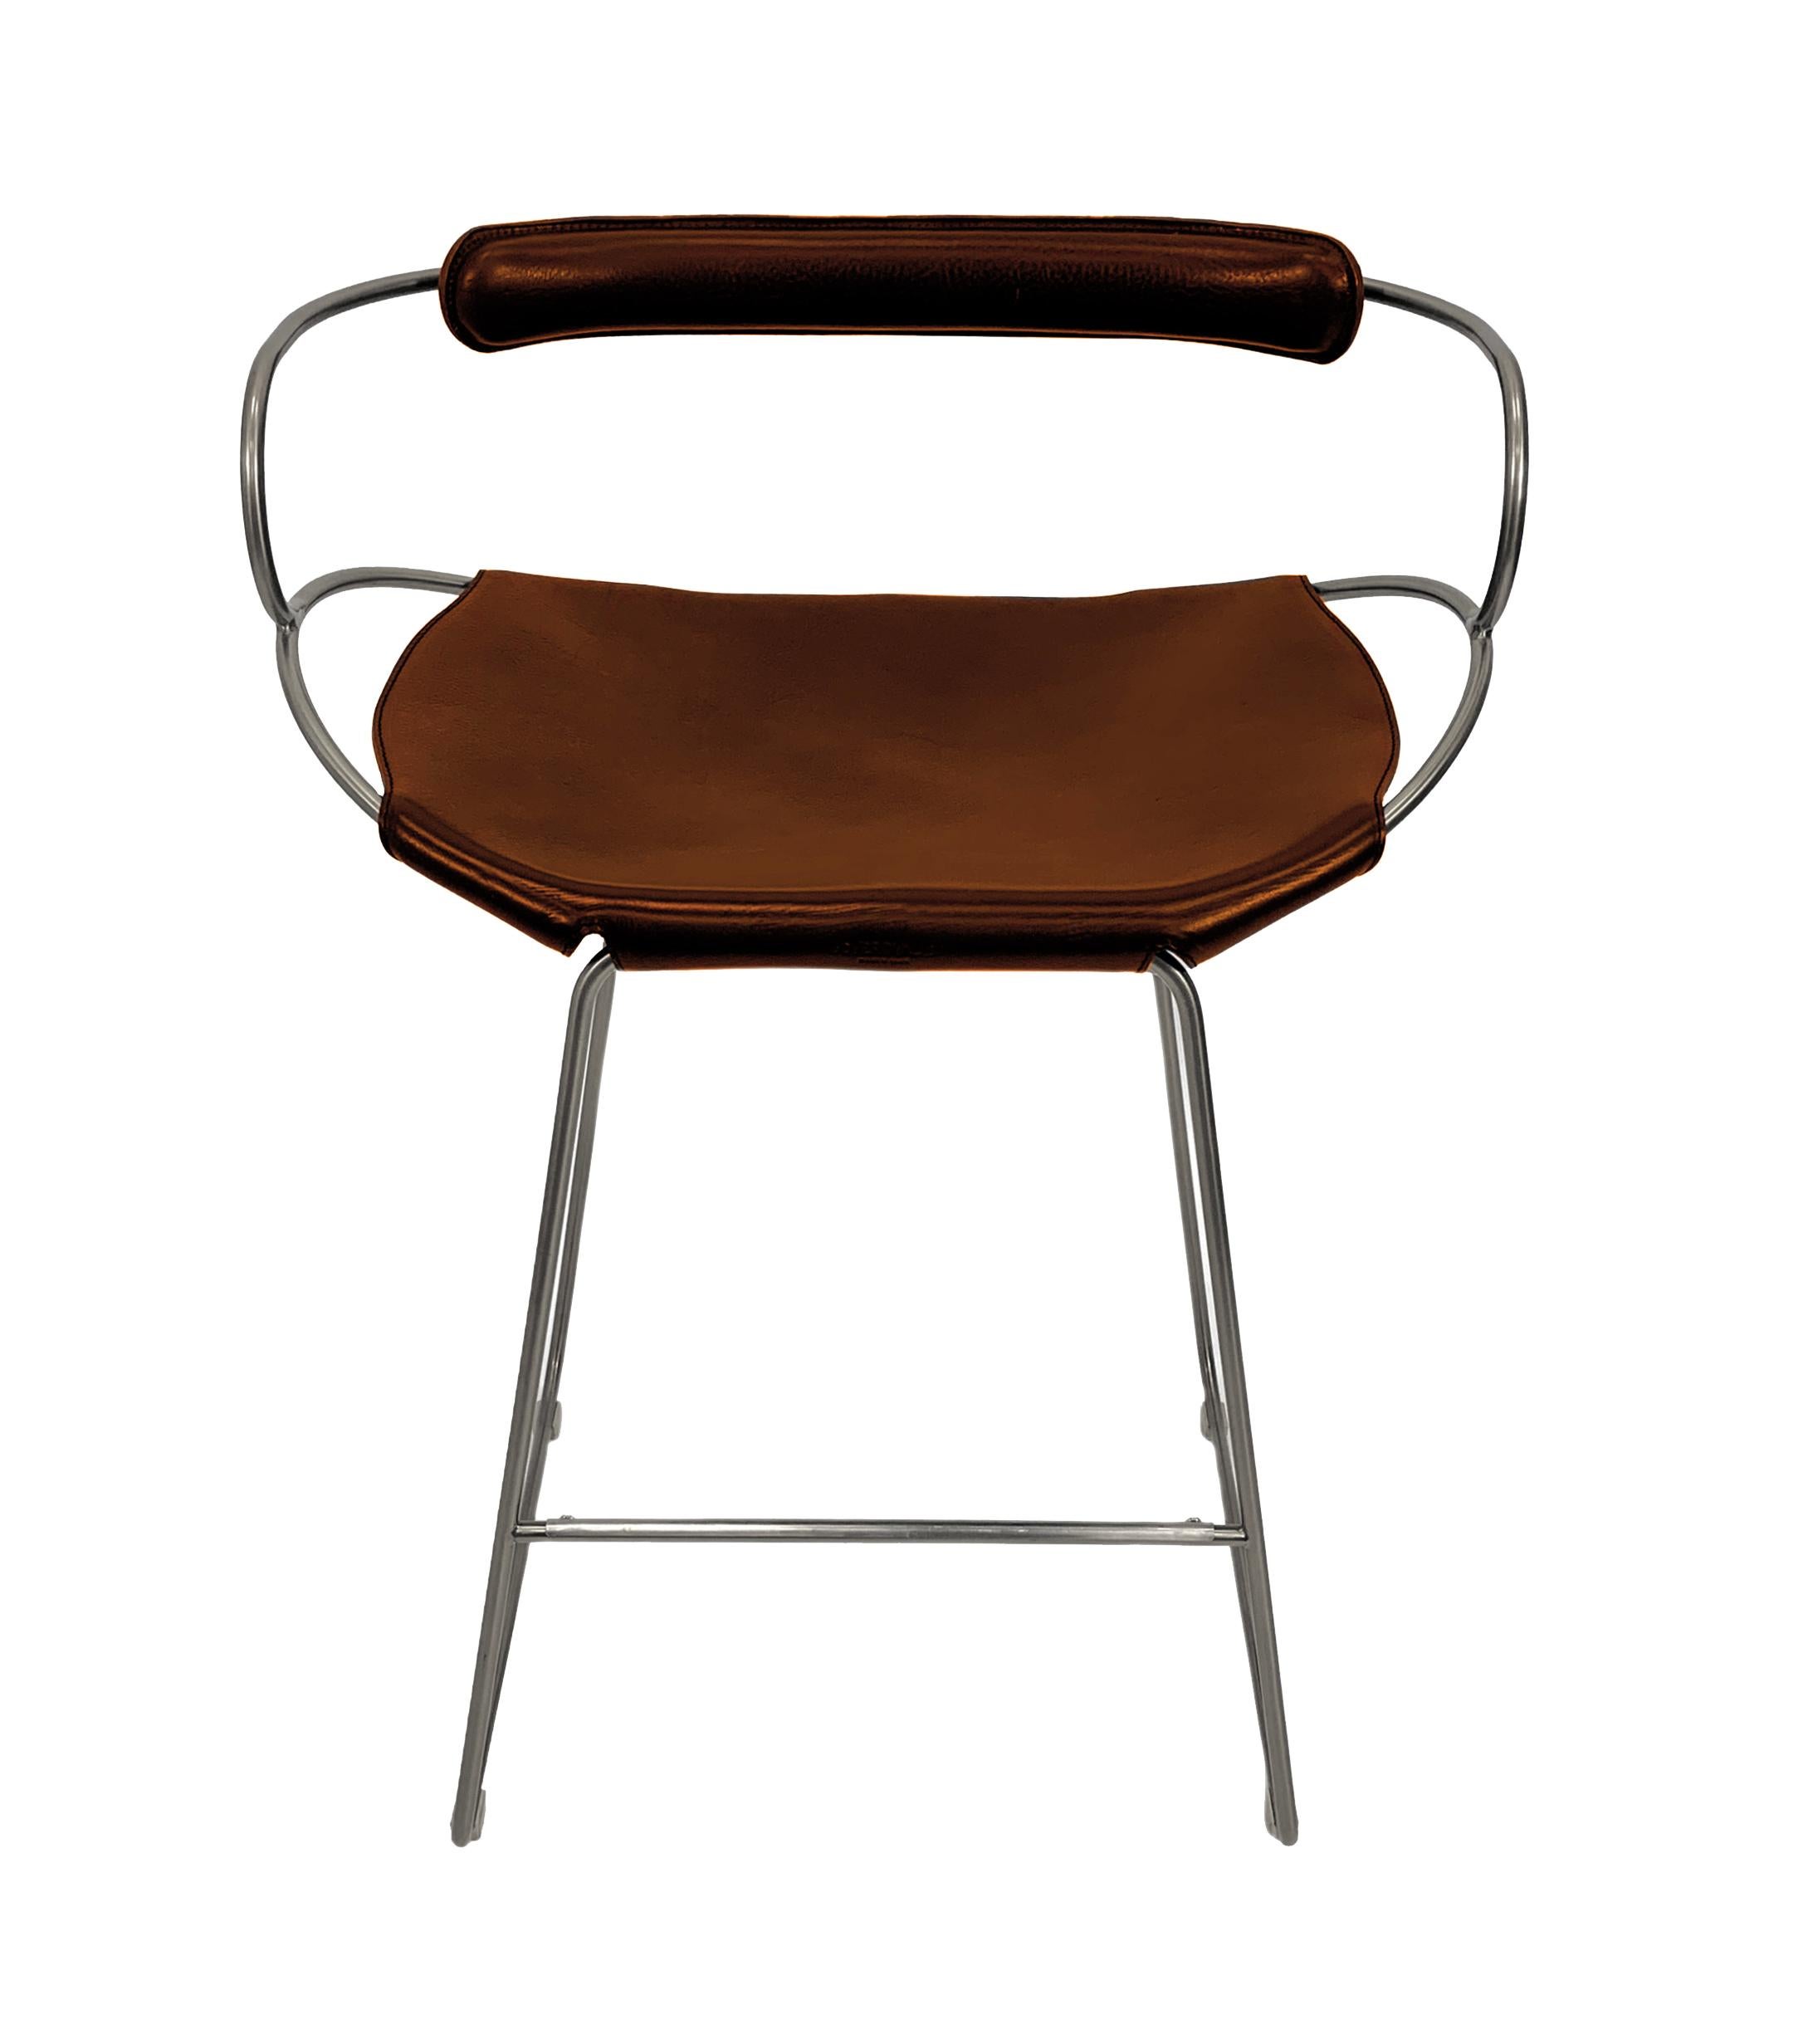 Contemporary Sculptural Bar Stool w. Backrest Old Silver Steel & Cognac Leather